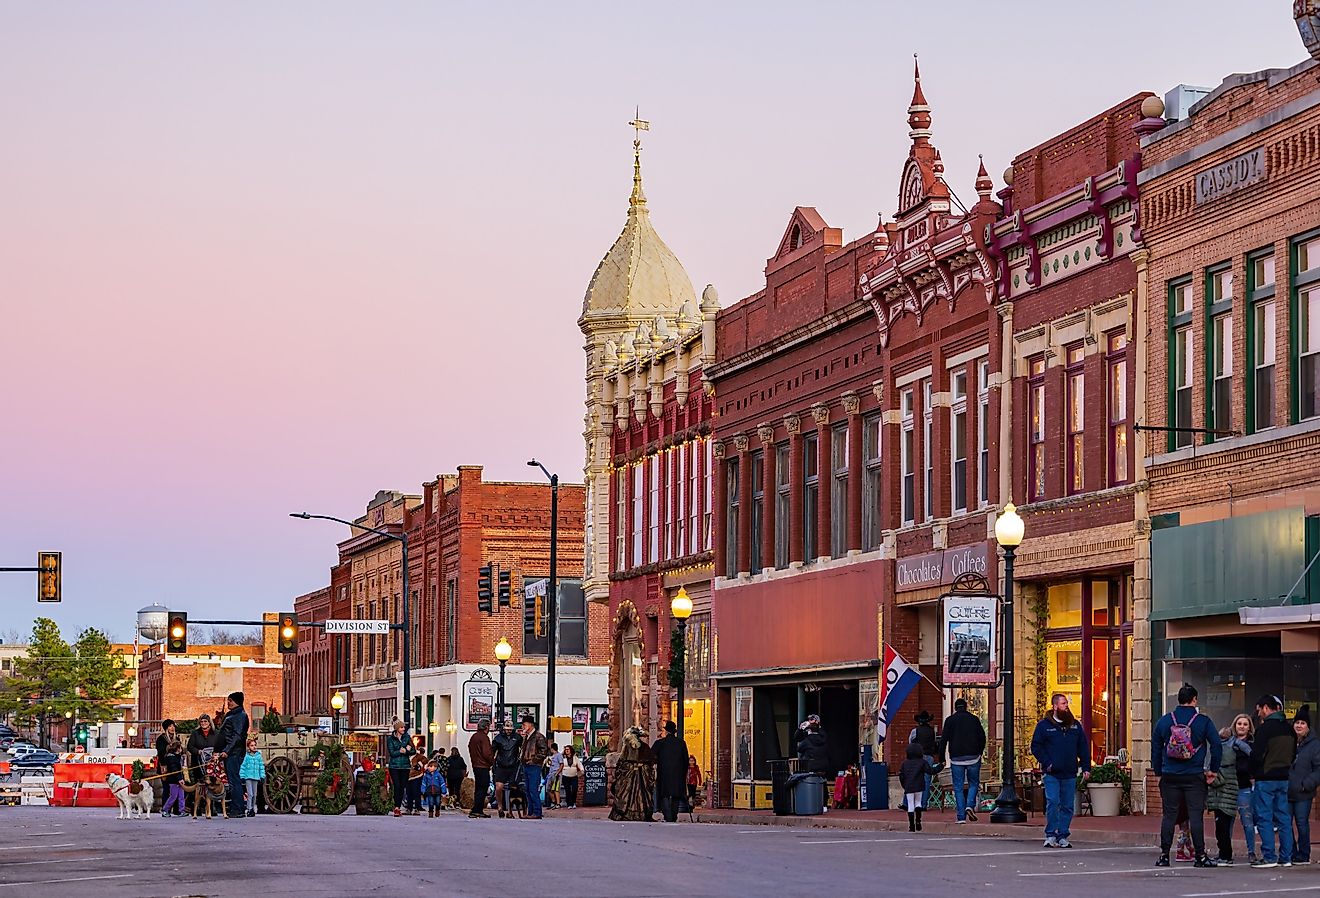 Night view of the historical building in Guthrie, Oklahoma. Image credit Kit Leong via Shutterstock